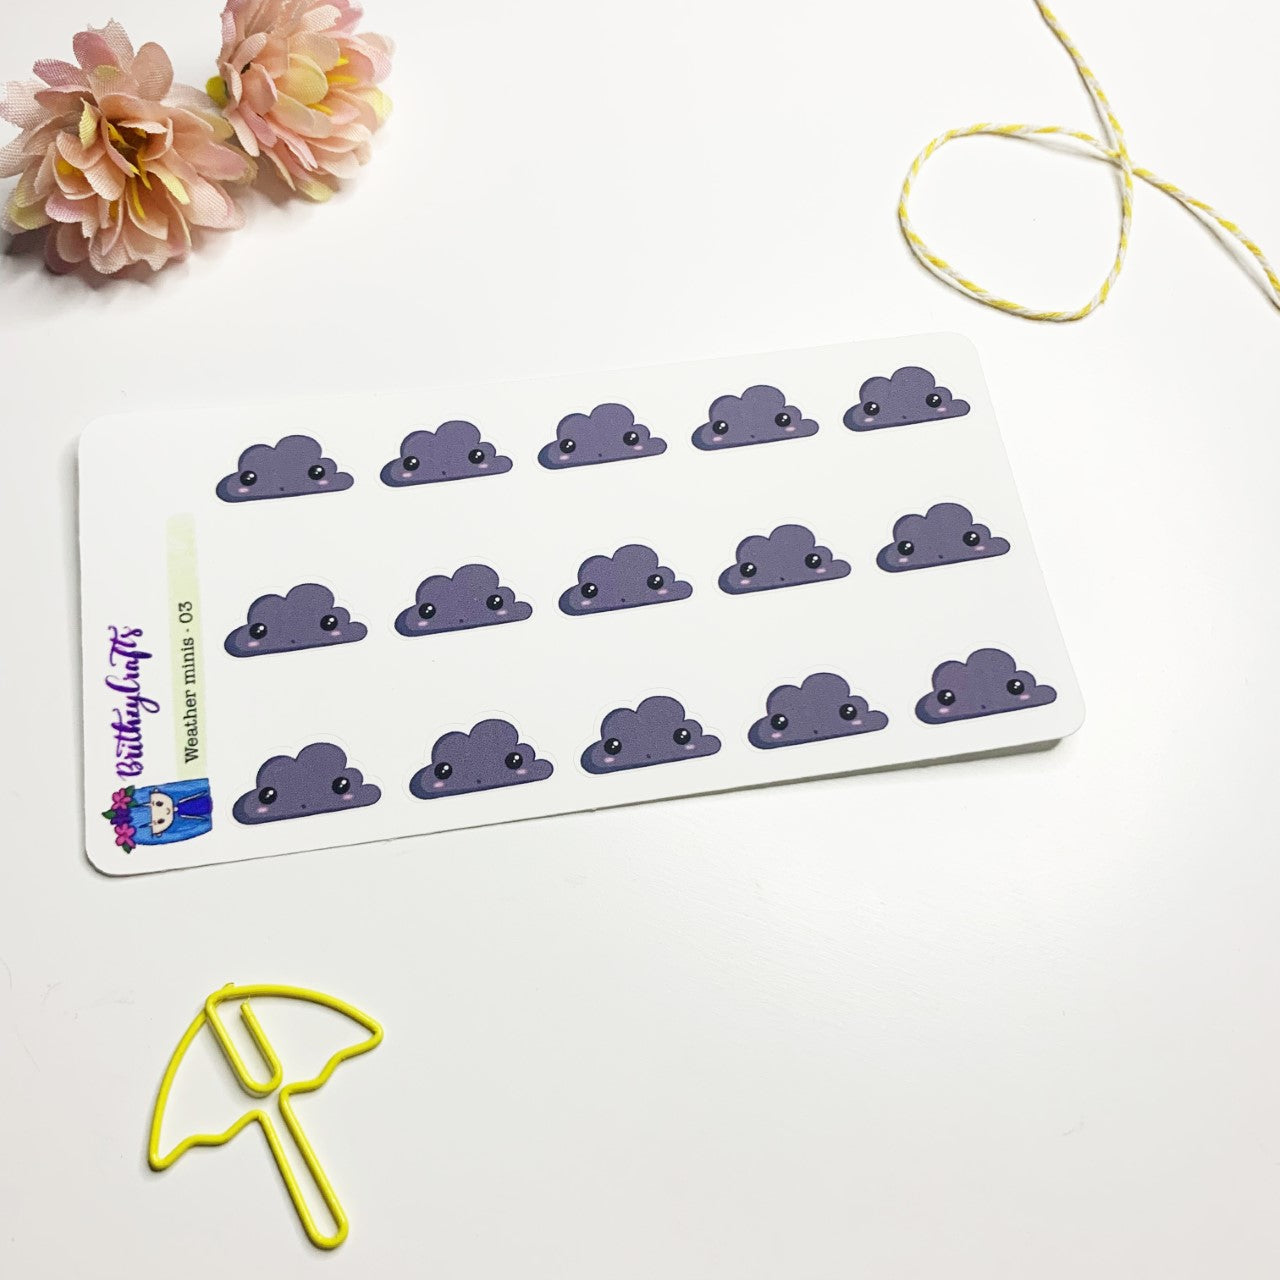 Weather minis - pick your design!